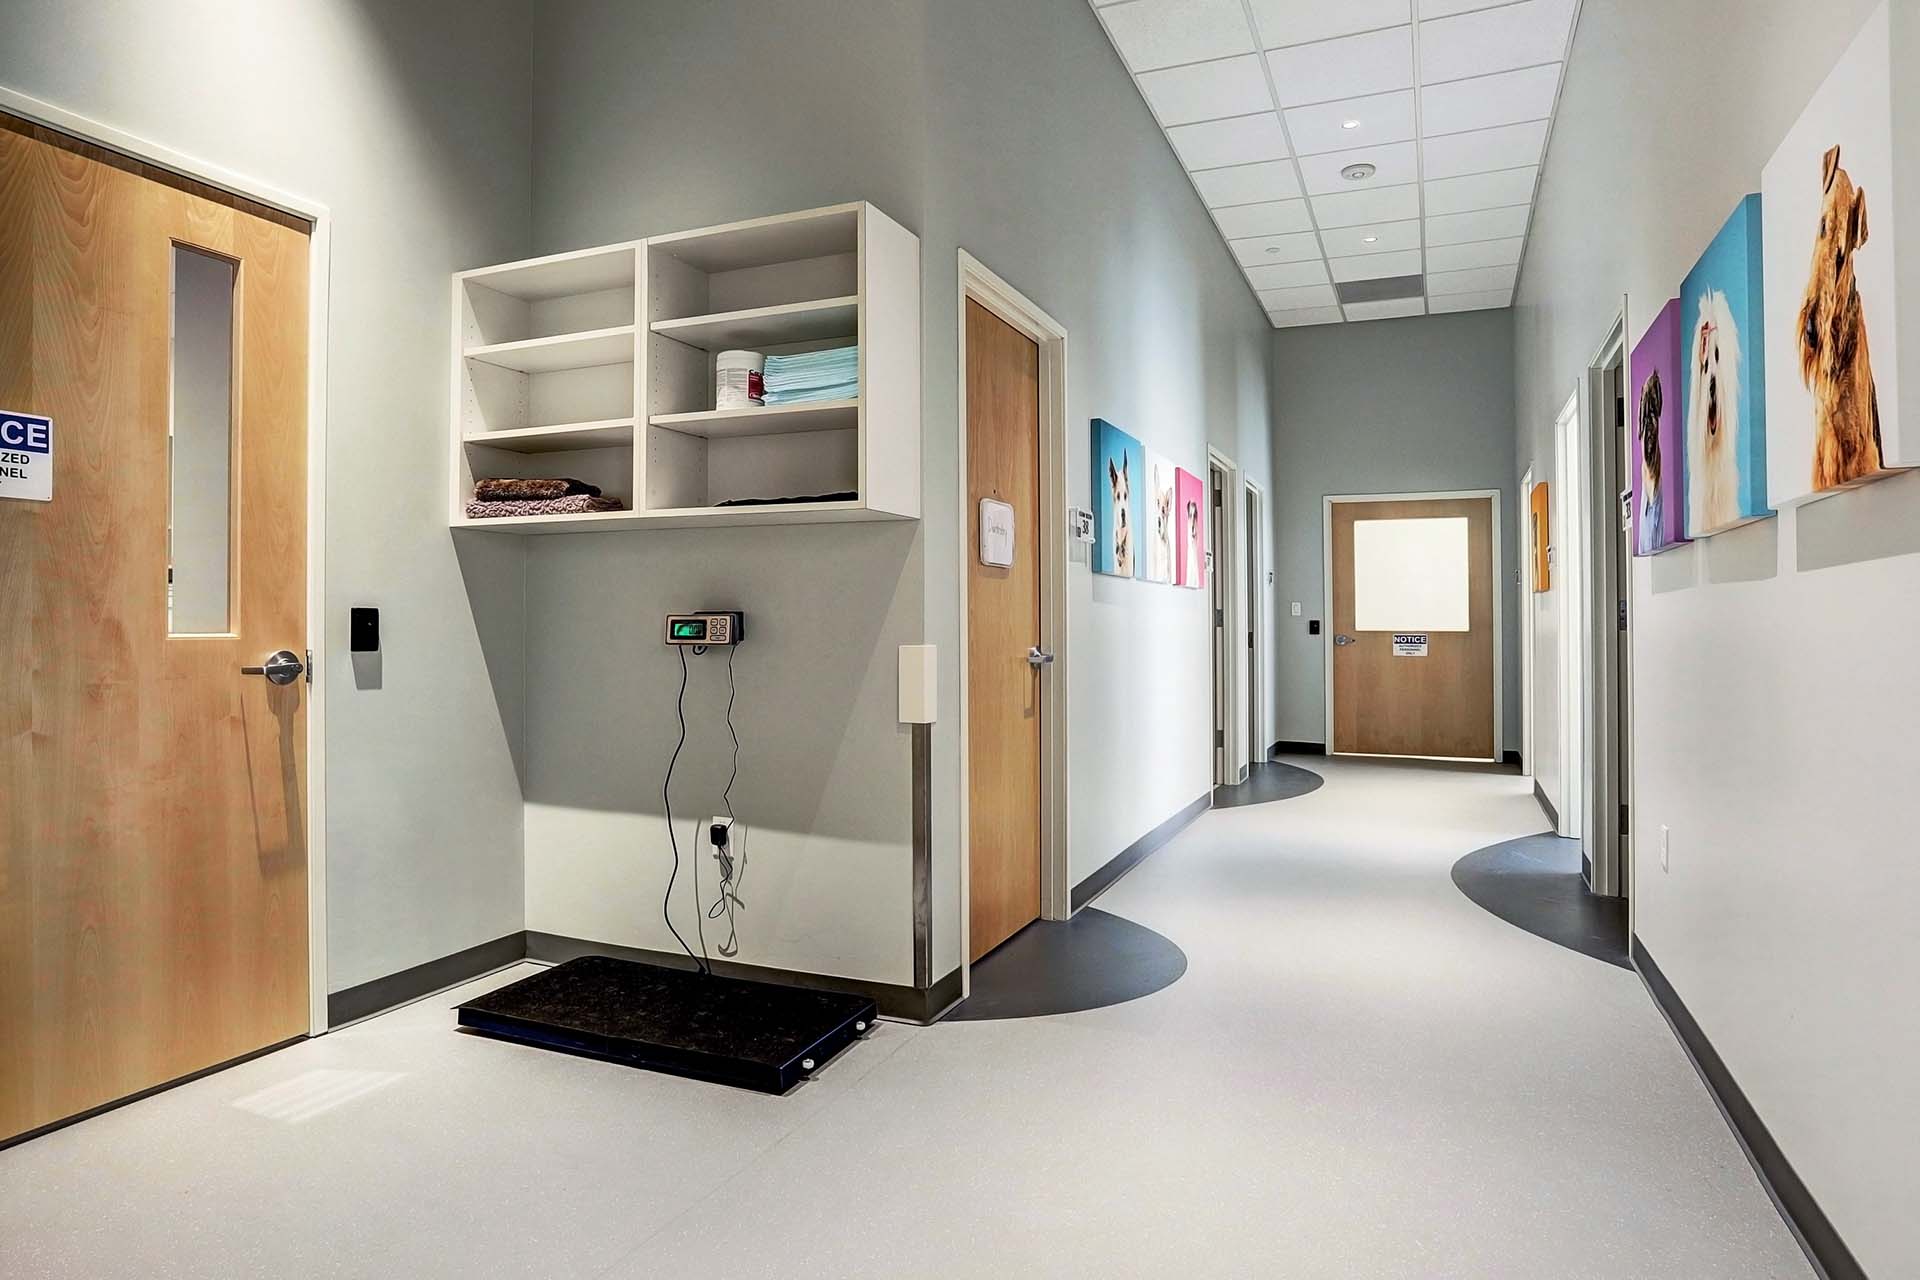 Altro floors installed in veterinary clinic imaging area